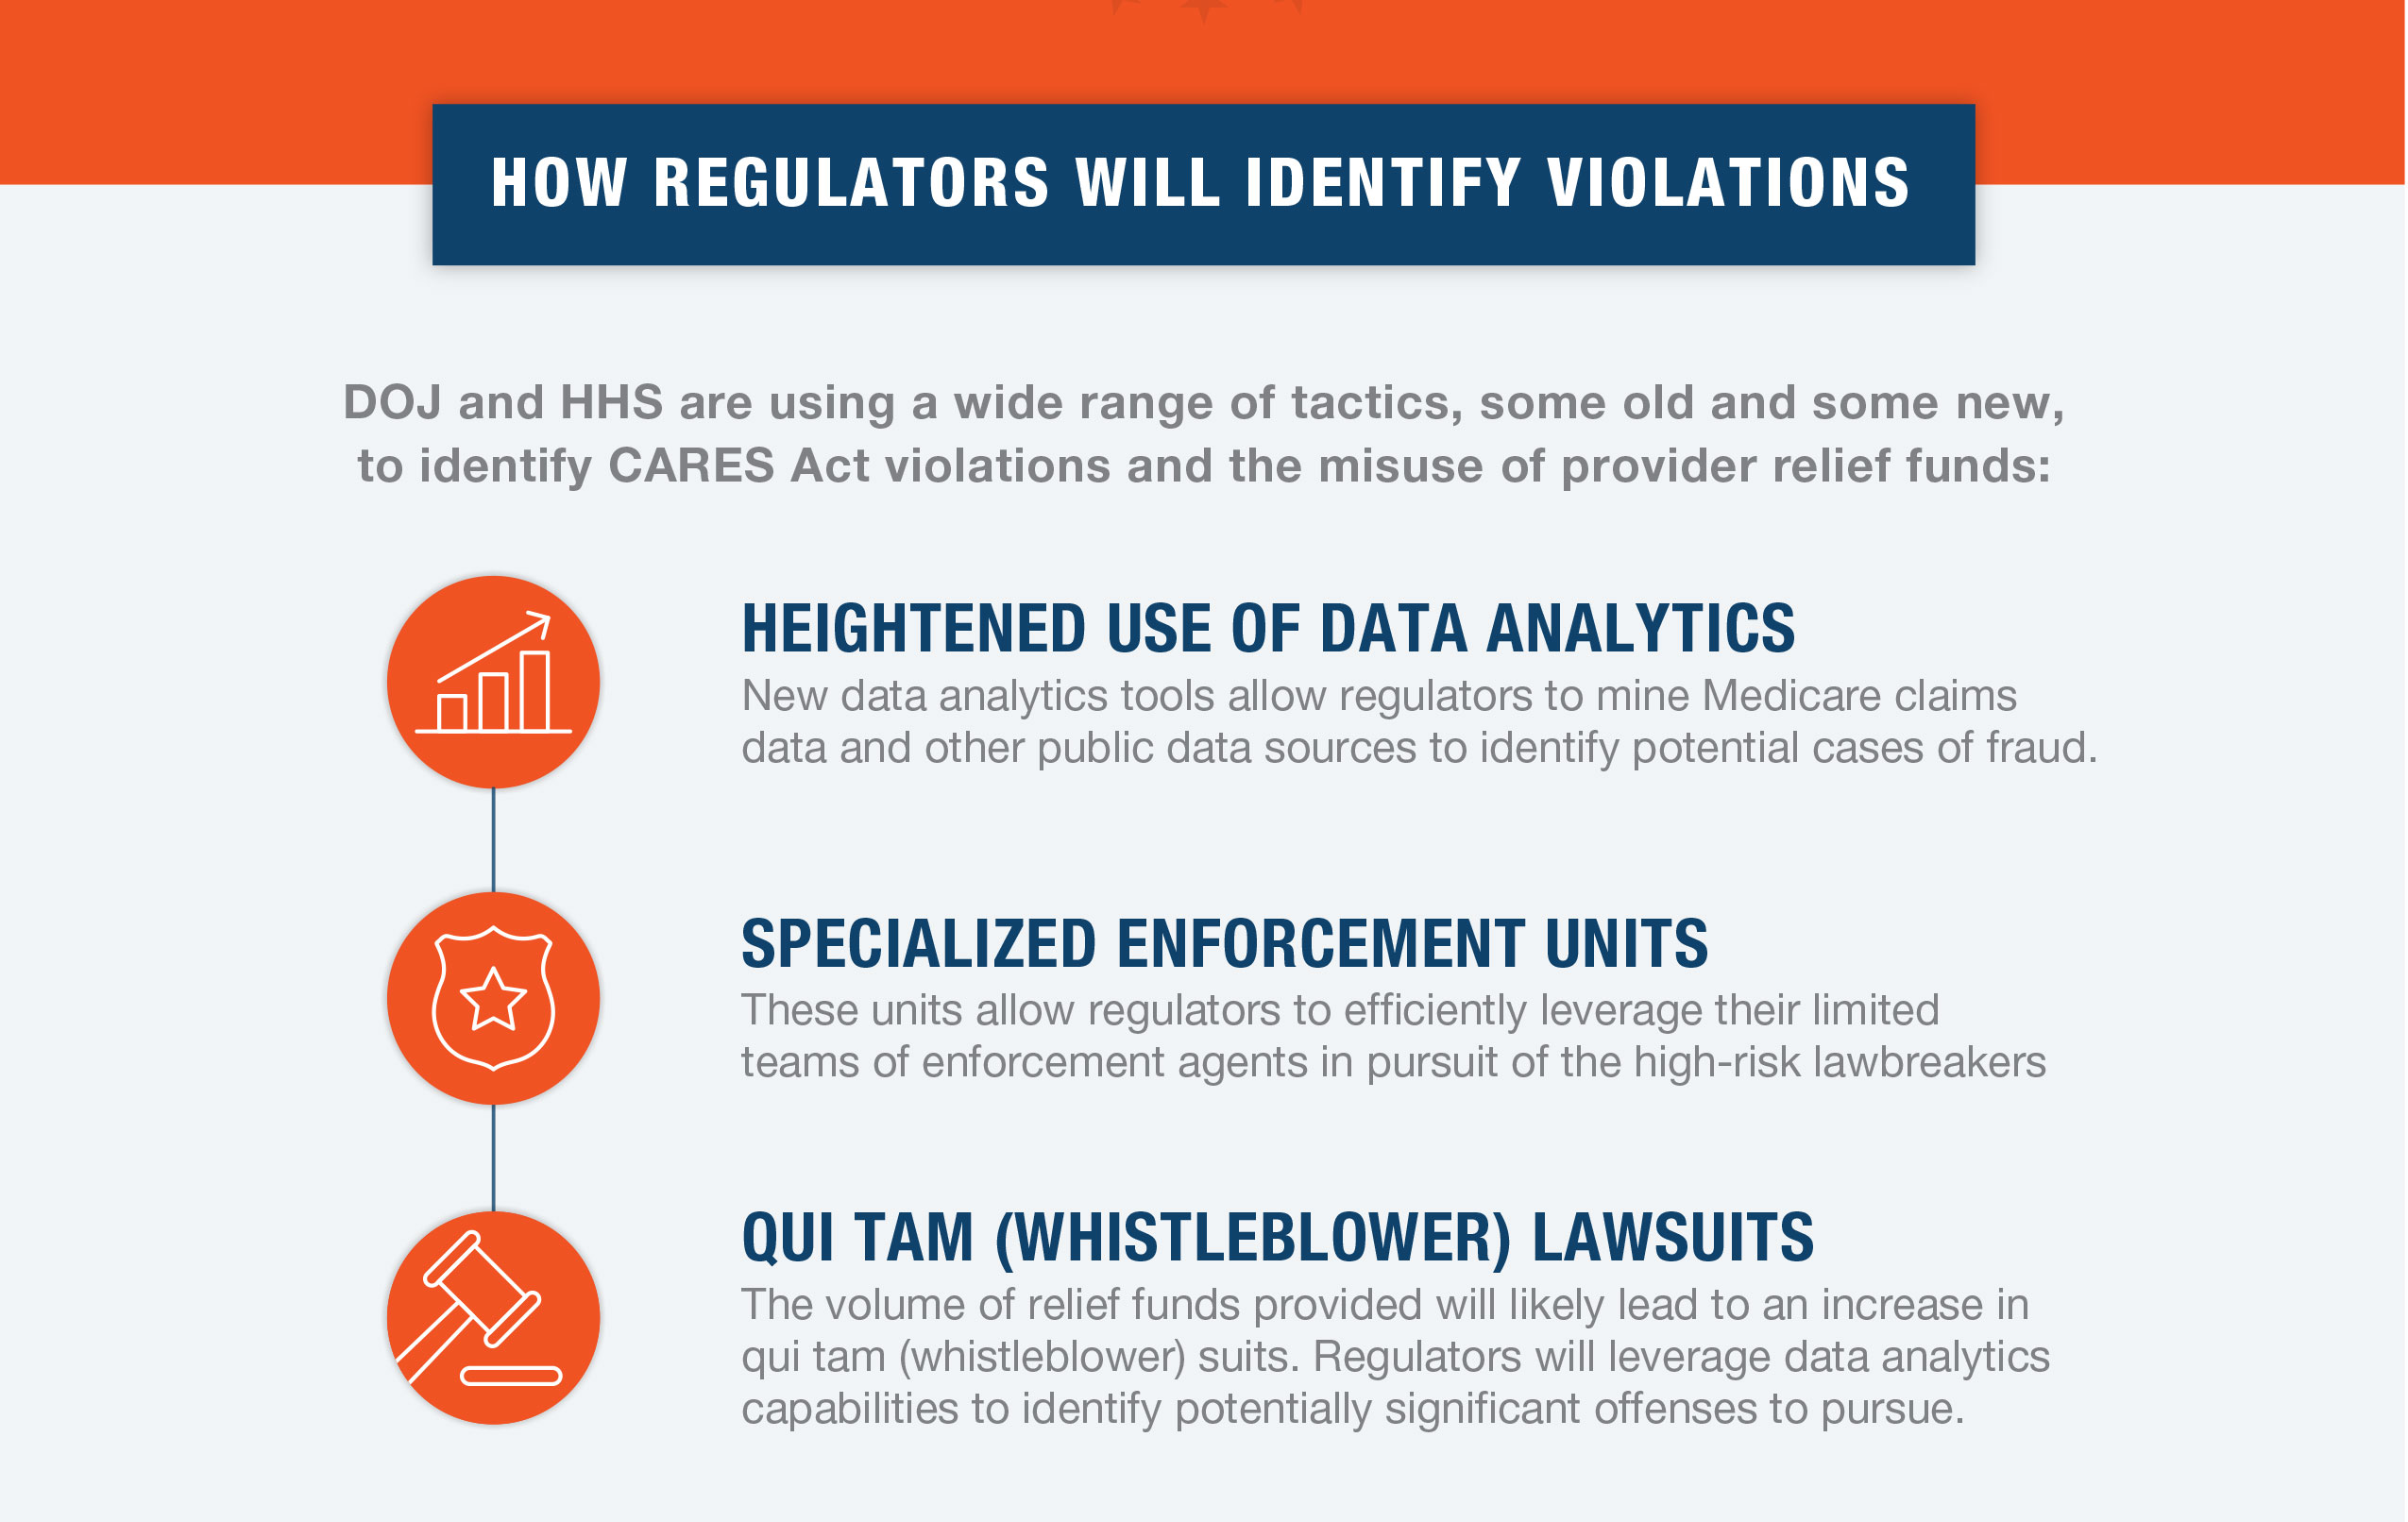 HOW REGULATORS WILL IDENTIFY VIOLATIONS

DOJ and HHS are using a wide range of tactics, some old and some new, to identify CARES Act violations and the misuse of provider relief funds:

HEIGHTENED USE OF DATA ANALYTICS
New data analytics tools allow regulators to mine Medicare claims data and other public data sources to identify potential cases of fraud.

SPECIALIZED ENFORCEMENT UNITS
These units allow regulators to efficiently leverage their limited teams of enforcement agents in pursuit of the high-risk lawbreakers

QUI TAM (WHISTLEBLOWER) LAWSUITS
The volume of relief funds provided will likely lead to an increase in qui tam (whistleblower) suits. Regulators will leverage data analytics capabilities to identify potentially significant offenses to pursue.